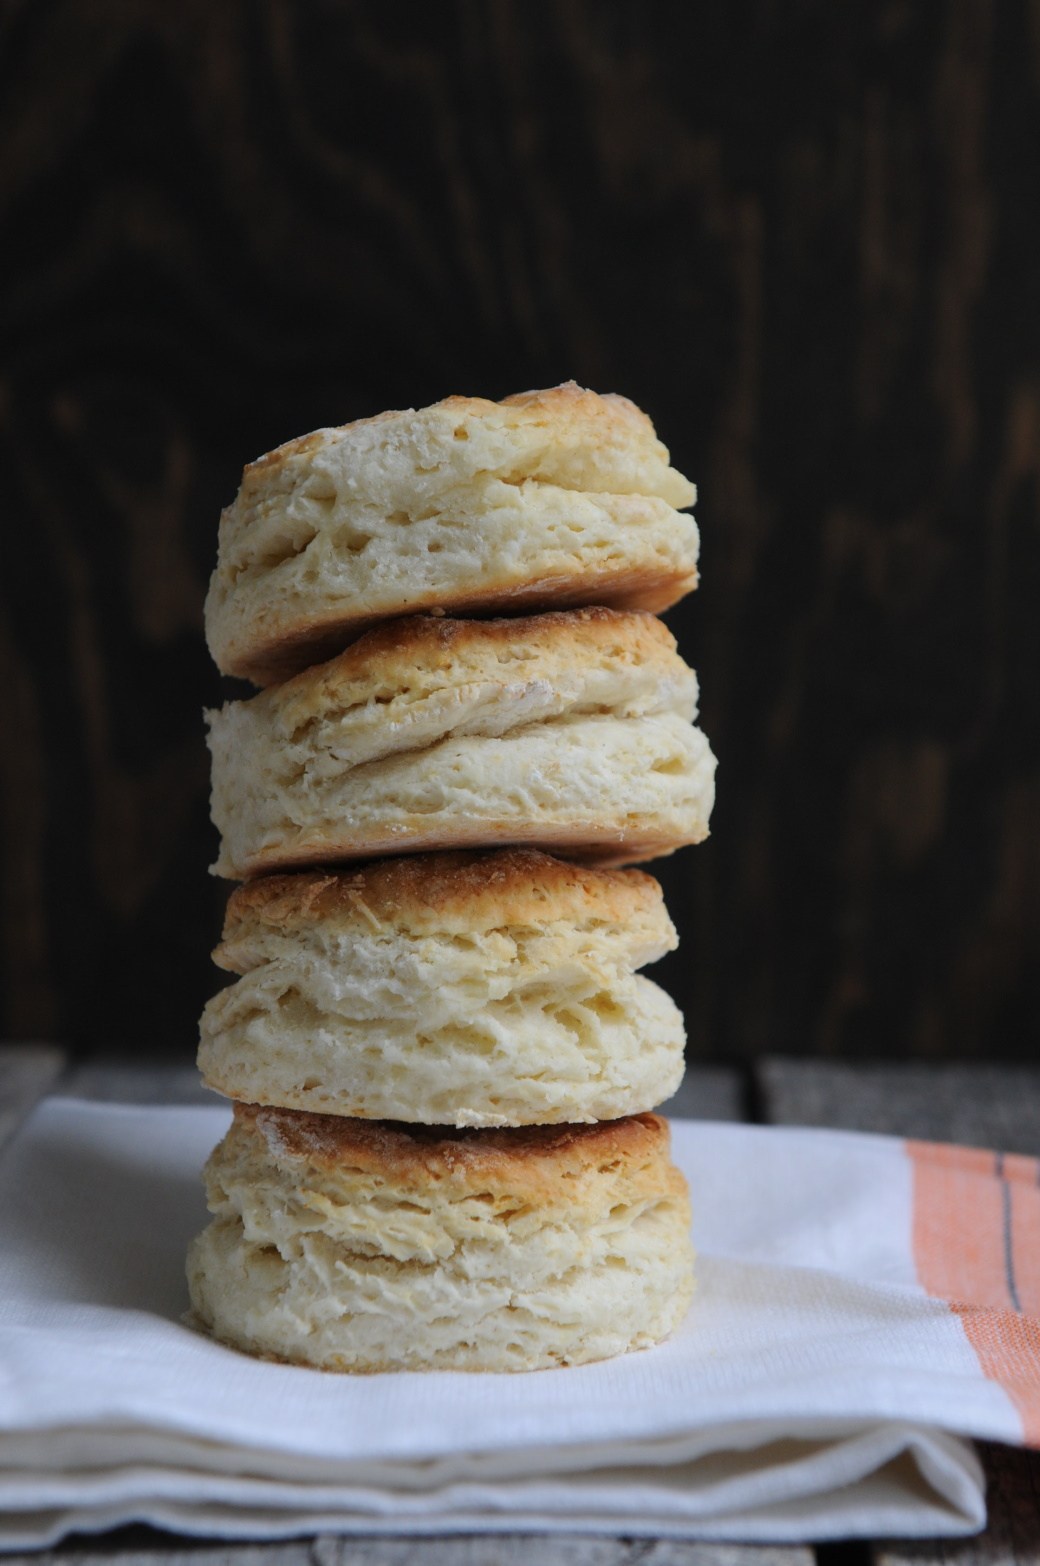 Southern Baking Powder Biscuits